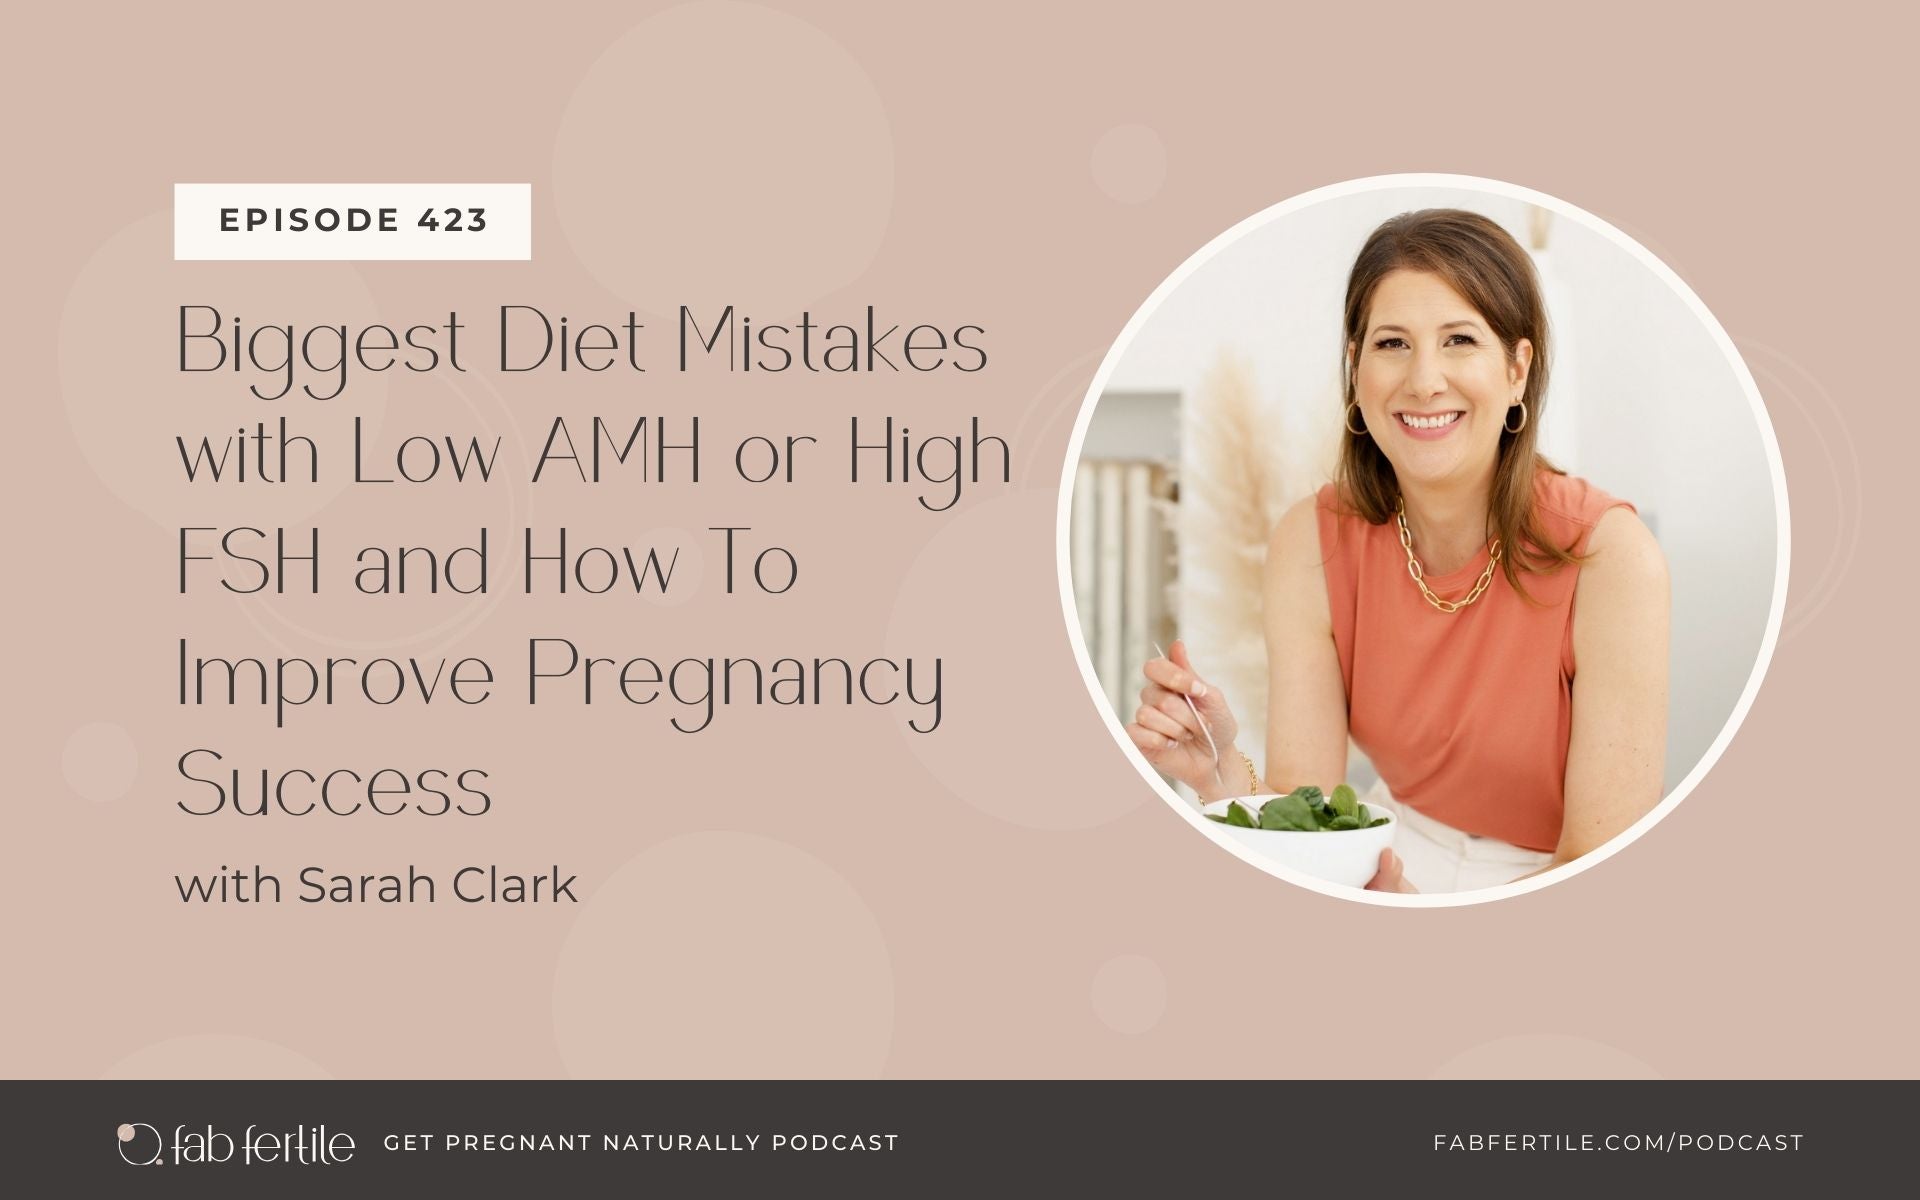 Biggest Diet Mistakes with Low AMH or High FSH and How To Improve Pregnancy Success